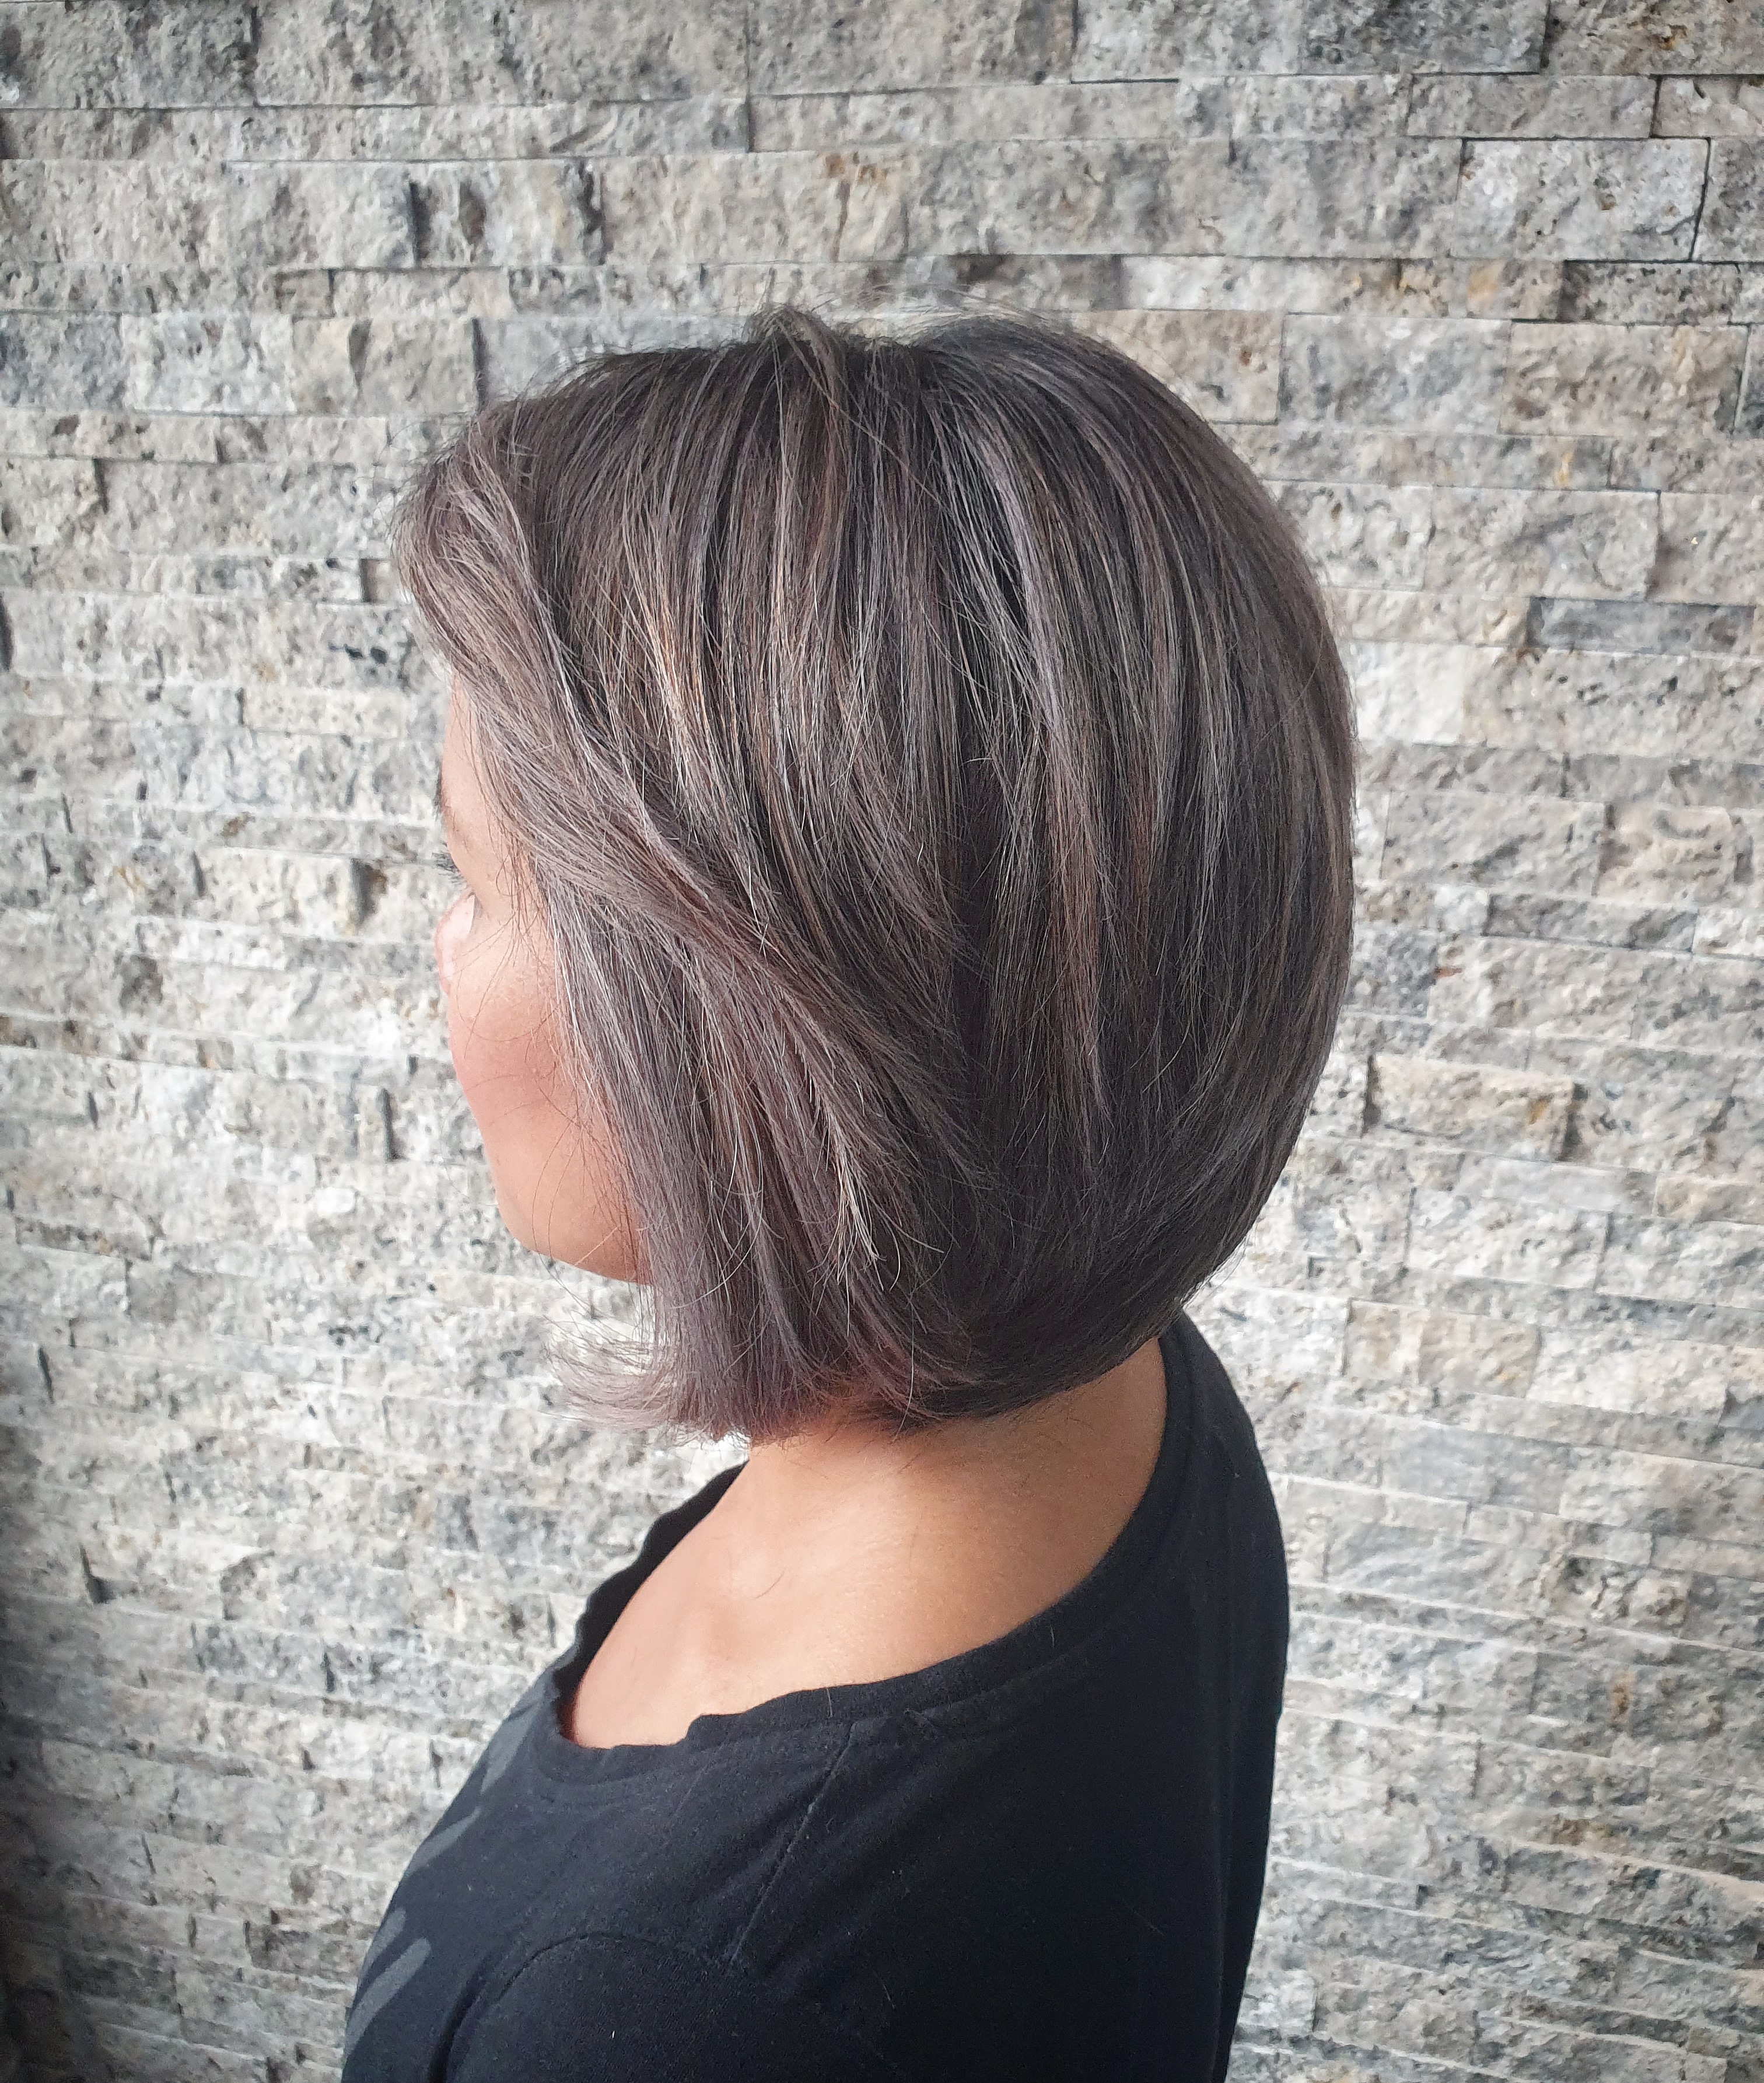 cut & color from black to greye